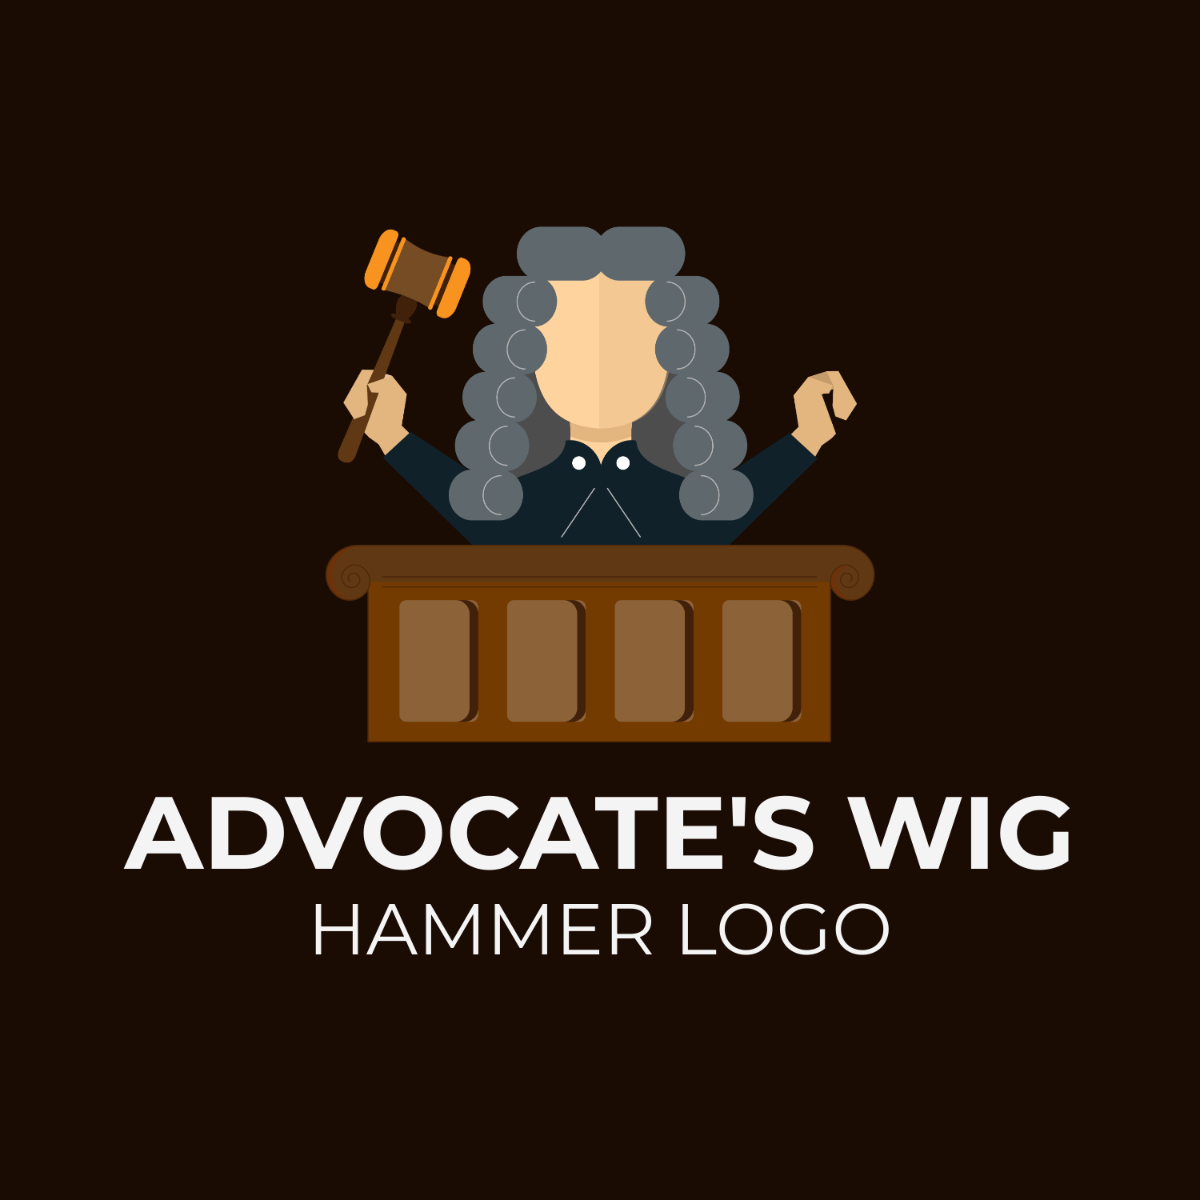 Advocate's Wig and Hammer Logo